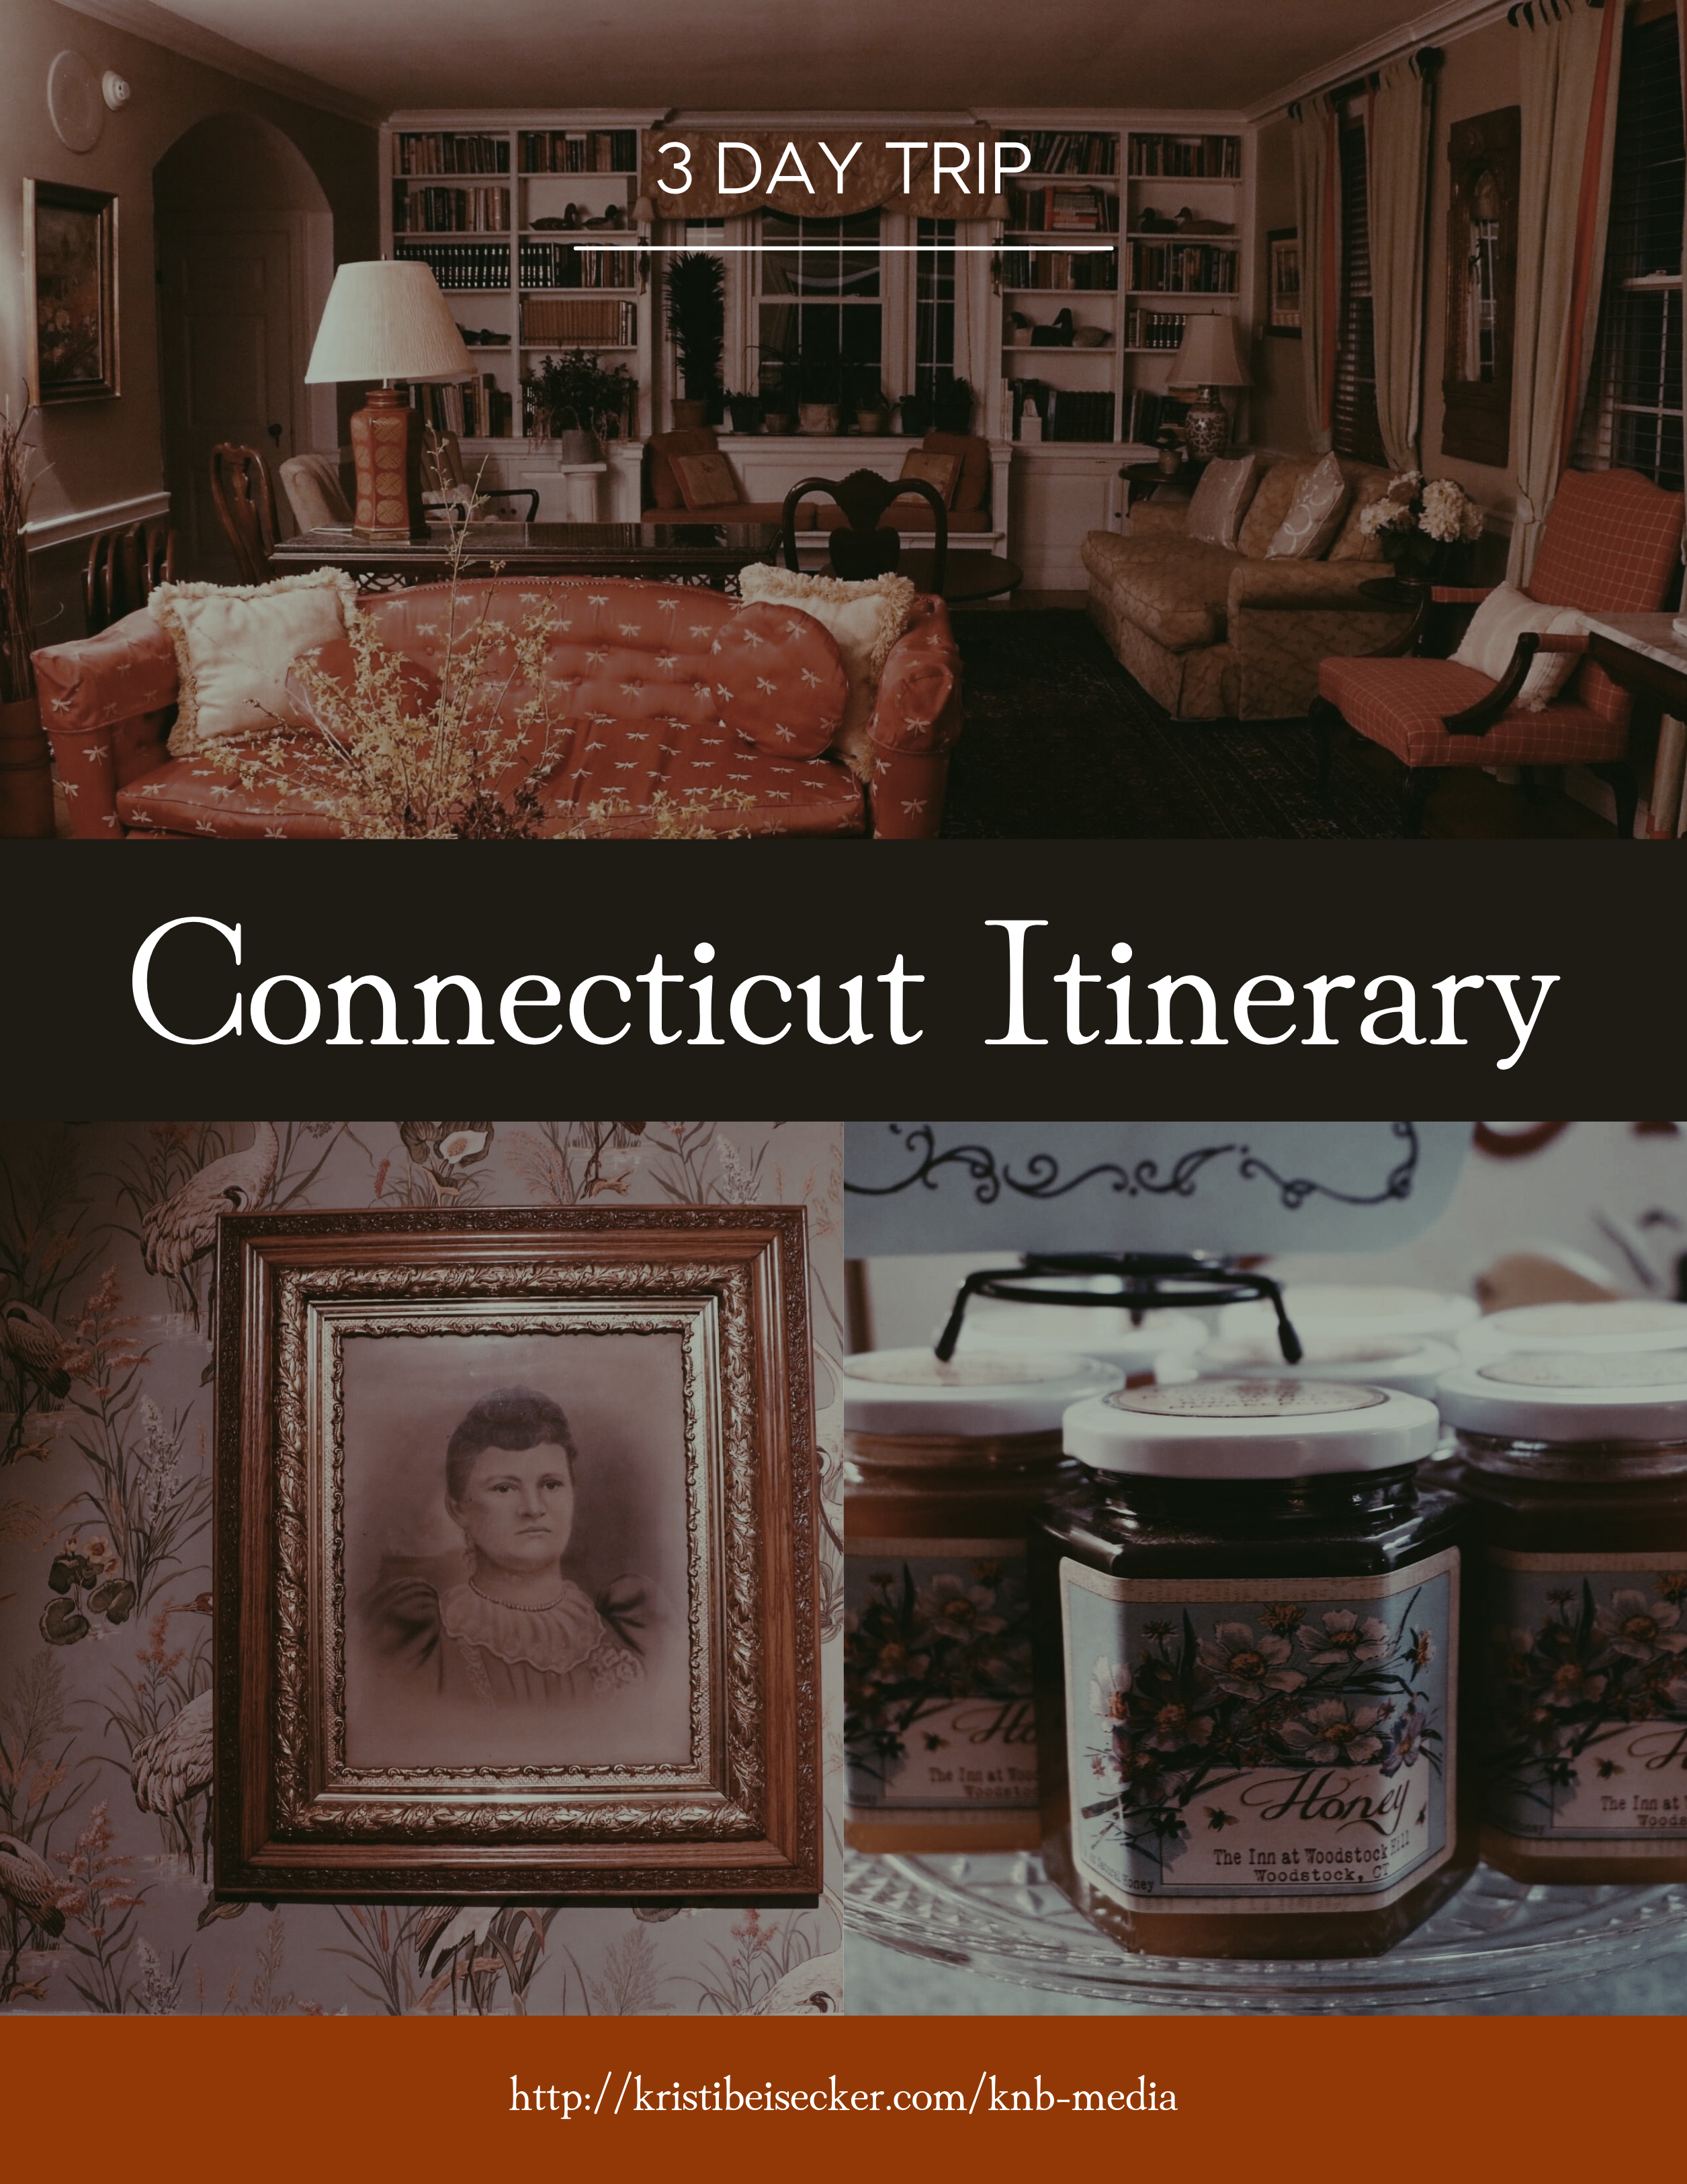 Connecticut Itinerary